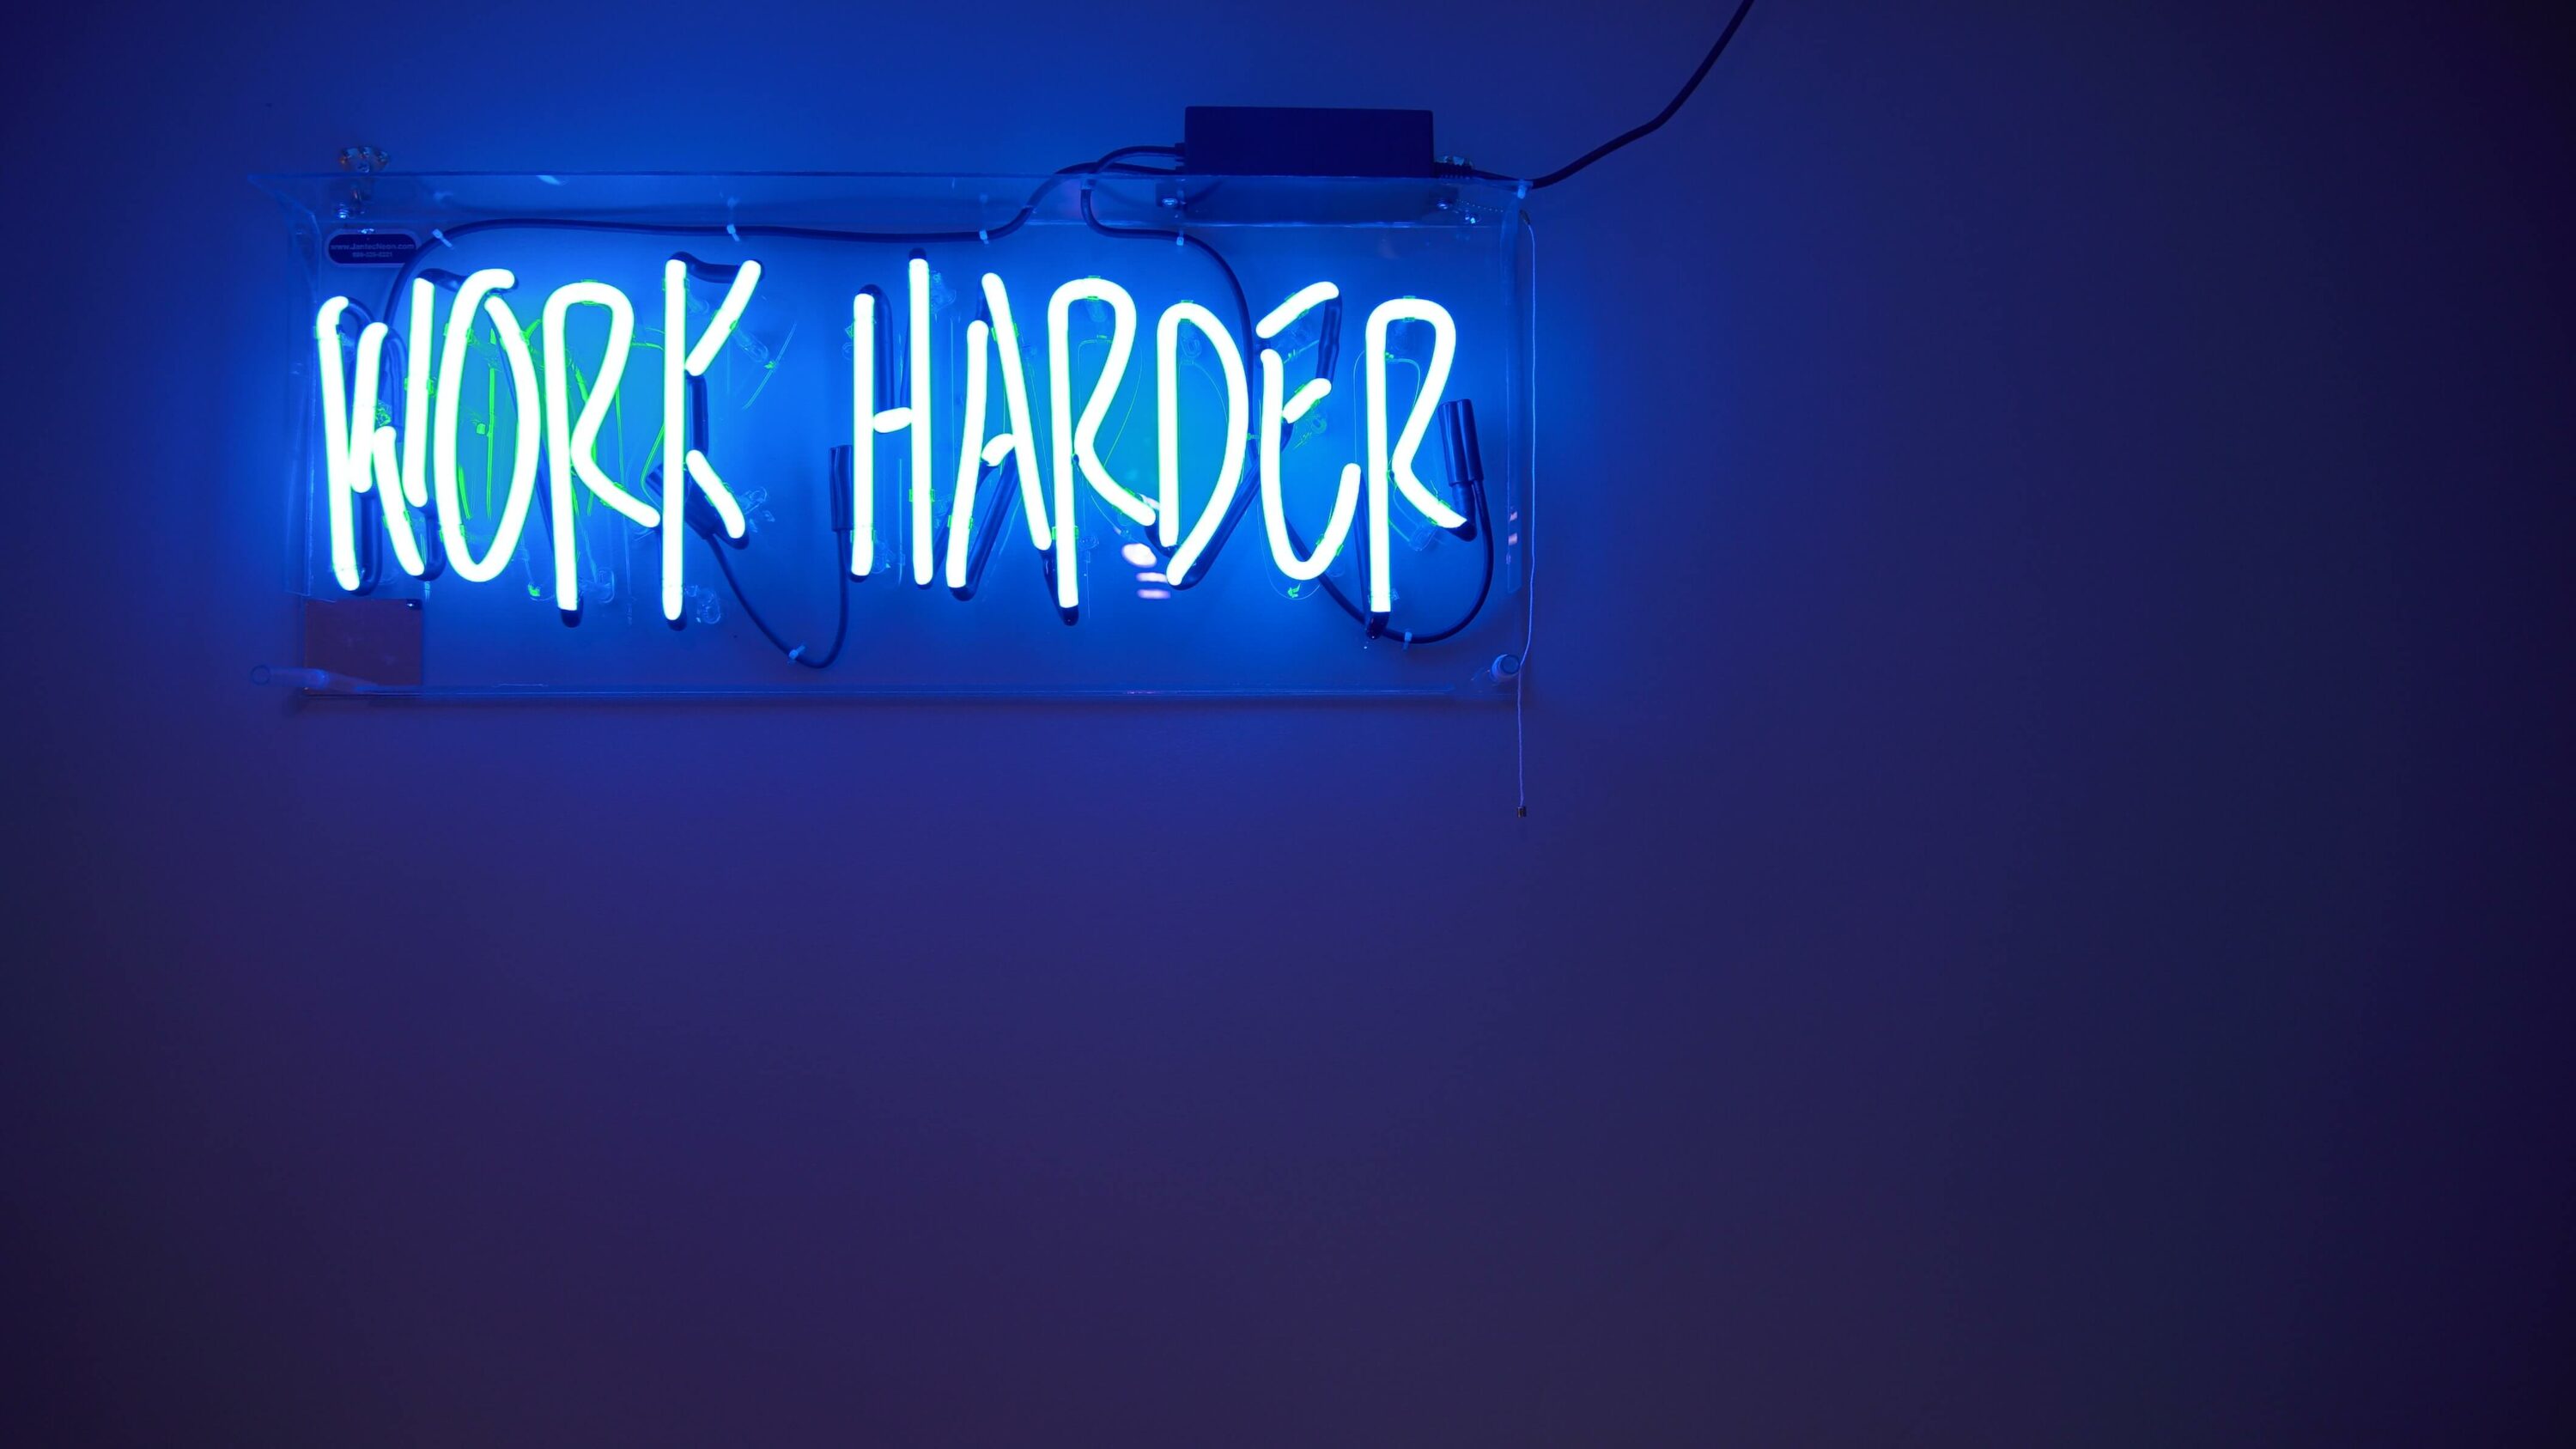 Lit up blue neon sign saying work harder. Its ok to be success and hard working, but overcoming perfectionism as a high achiever can create unhealthy behaviors. Get support with therapy for high achievers in Detroit, MI and begin recovering. Call now for online therapy in Michigan and therapy for men in Detroit, MI!